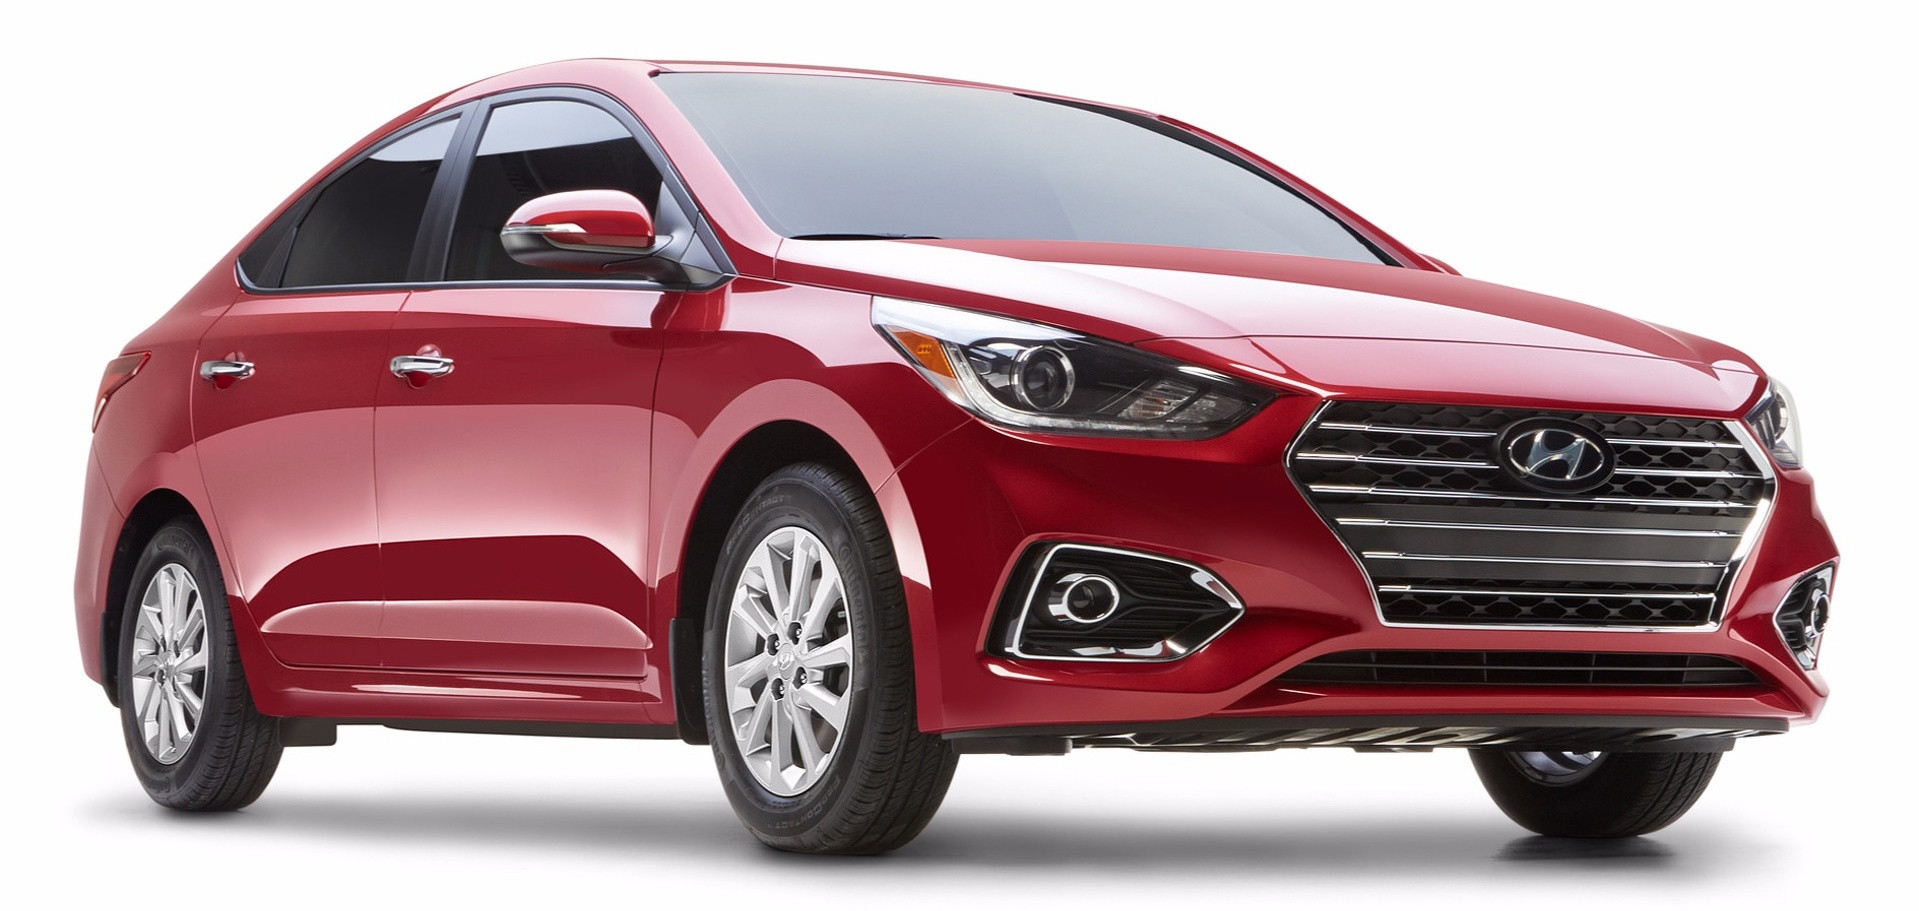 2018 Hyundai Accent - fifth-gen compact makes debut